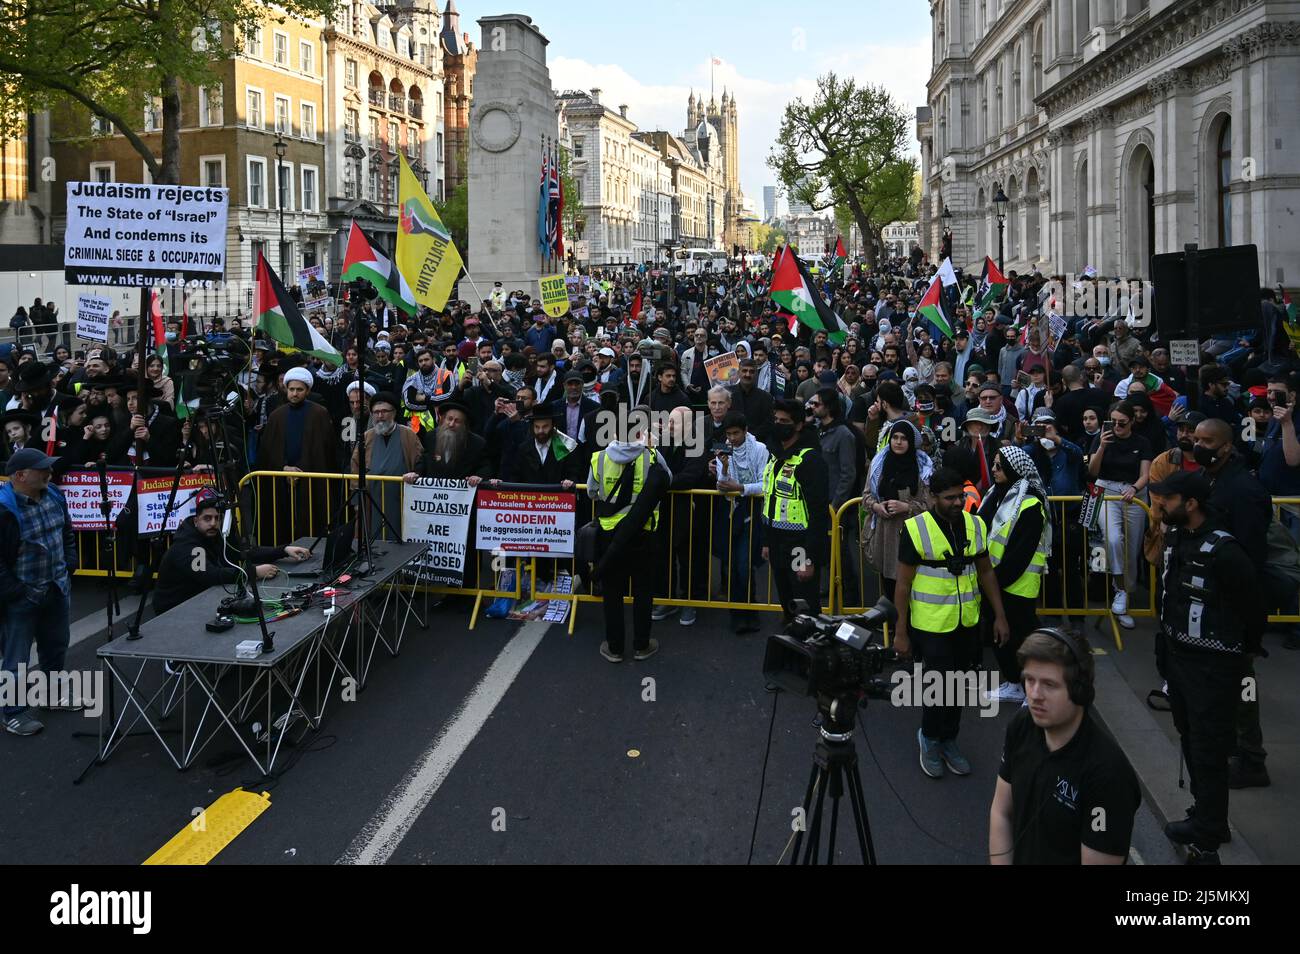 Downing Street, London, UK. 24 April 2022. Protest against Israelis police stormed Al-Aqsa mosque compound, firing rubber bullets and stun grenades during the holy Muslim fasting month of Ramadan, 57 people were wounded on Friday, including 14 Palestinians taken to hospital, one of them in a serious condition. Credit: Picture Capital/Alamy Live News Stock Photo